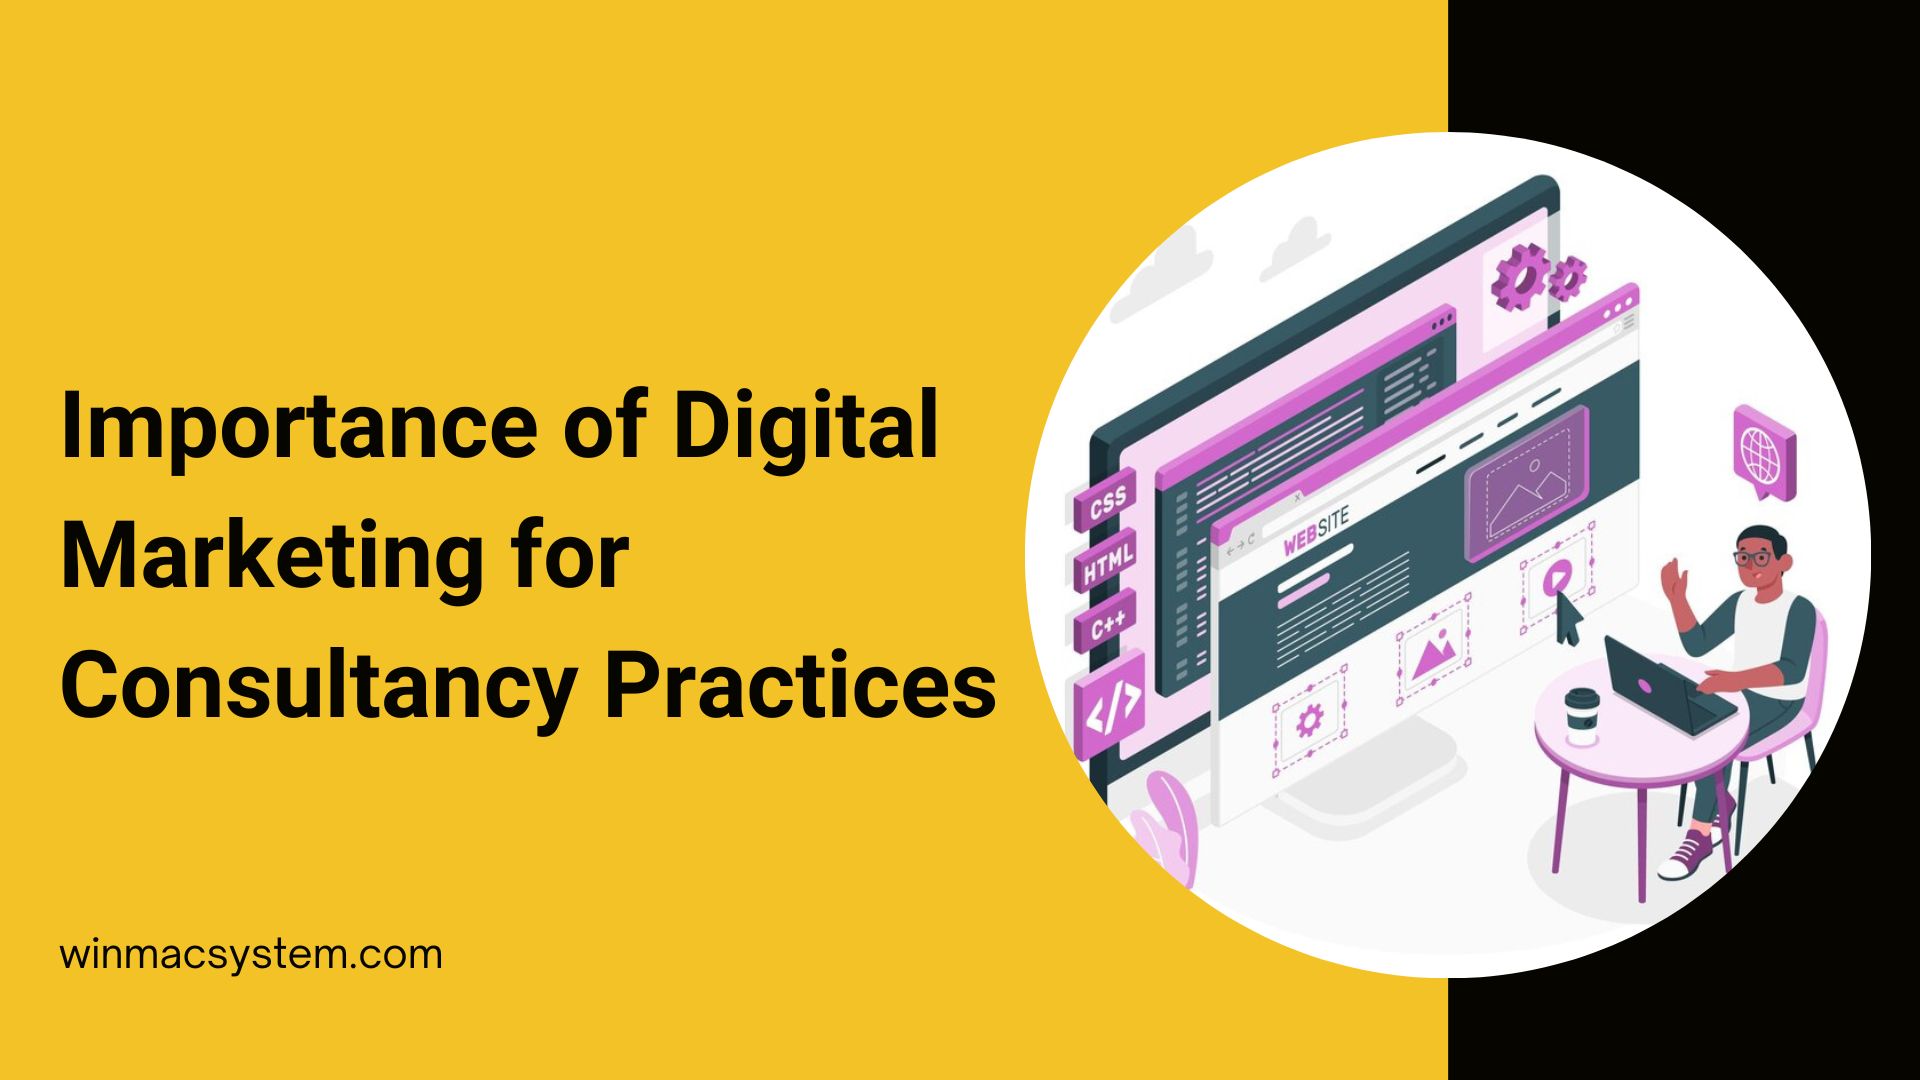 Importance of Digital Marketing for Consultancy Practices